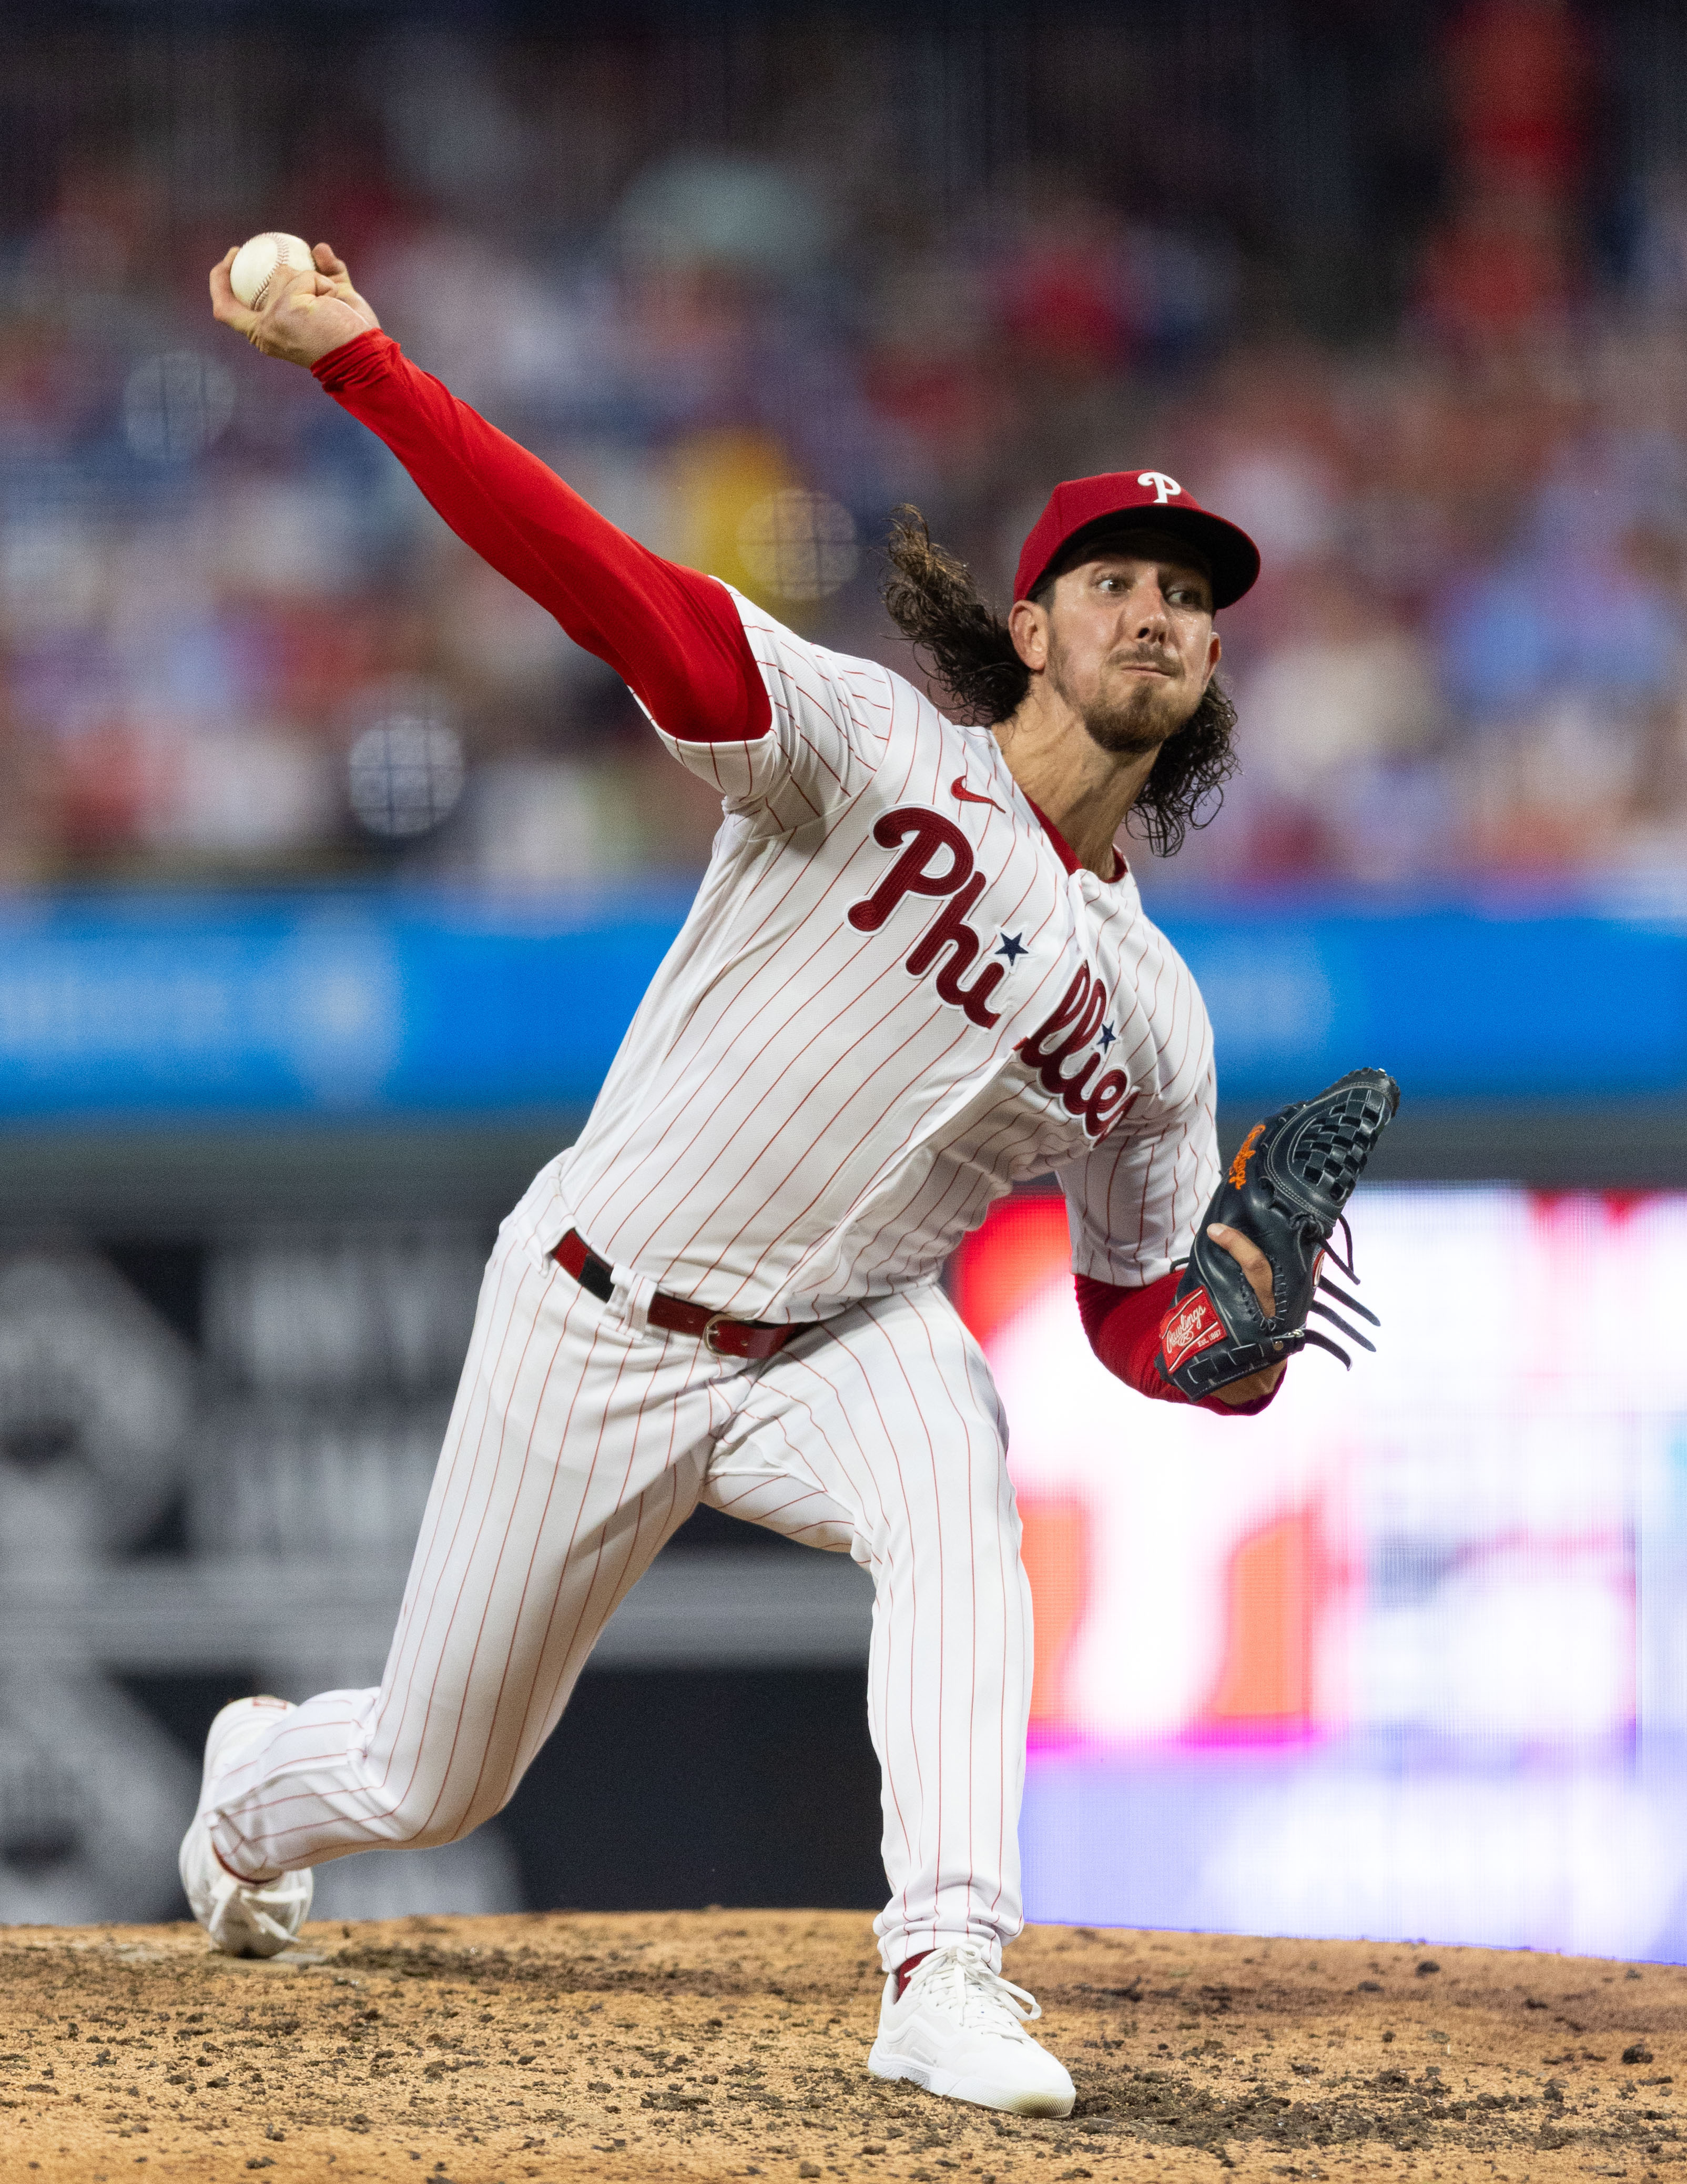 Nola takes no-hitter into 7th, Turner has 2 HRs as Phillies beat